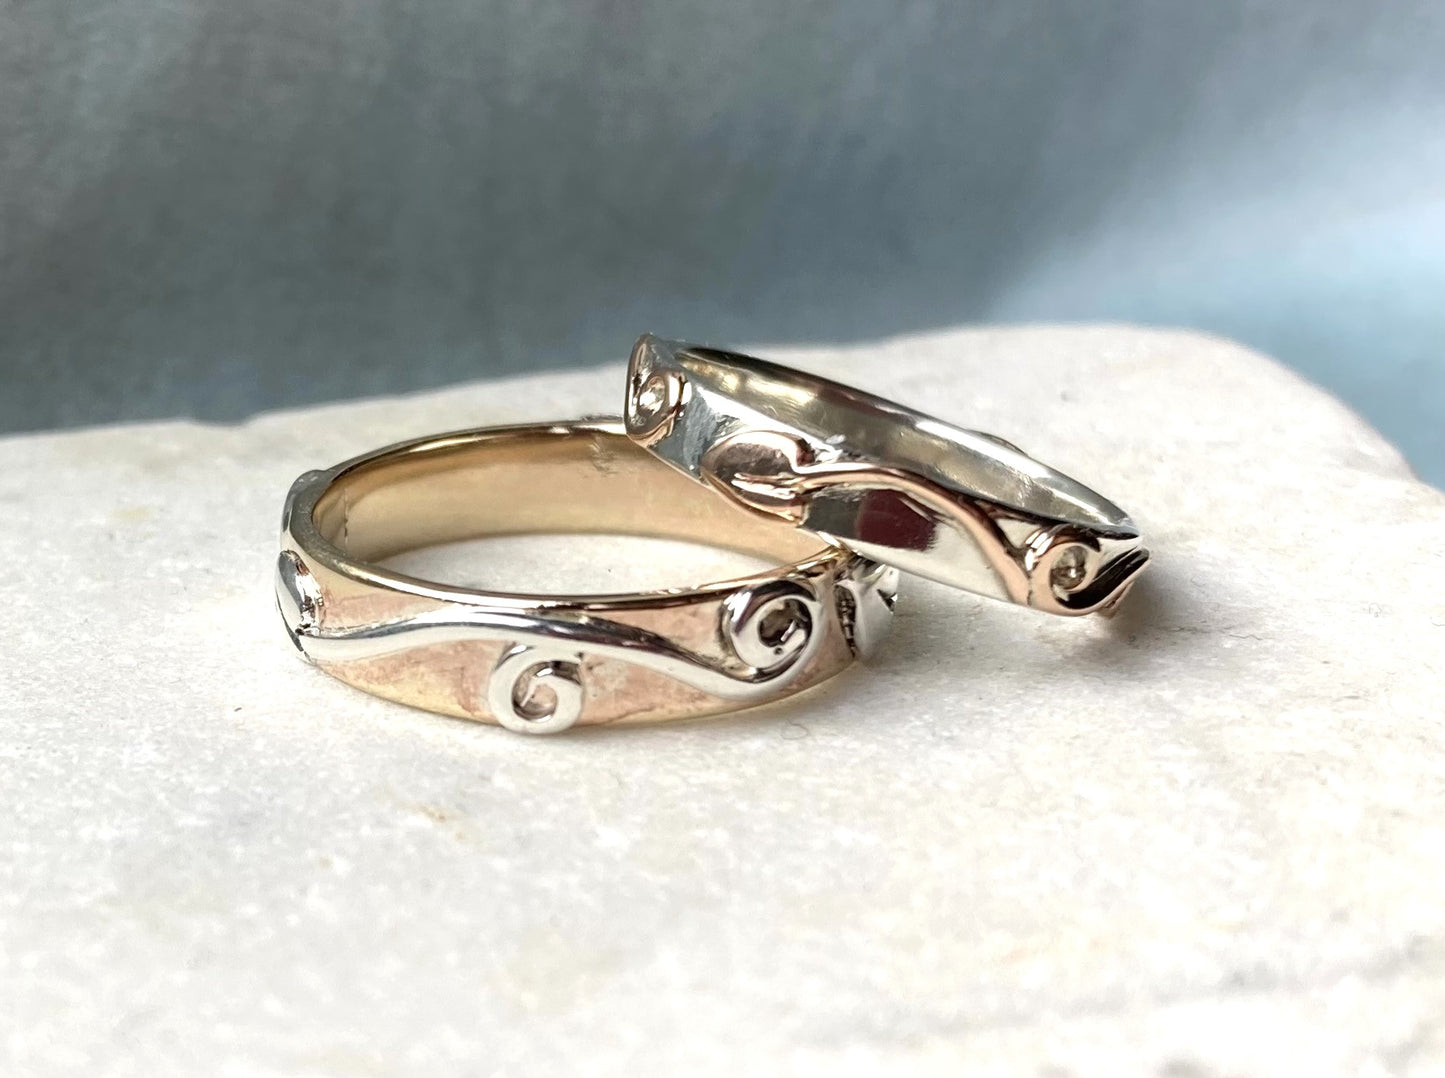 matching fancy wedding rings, one in rose gold with white gold raised scroll details and one in white gold with yellow gold scroll details, resting on marble